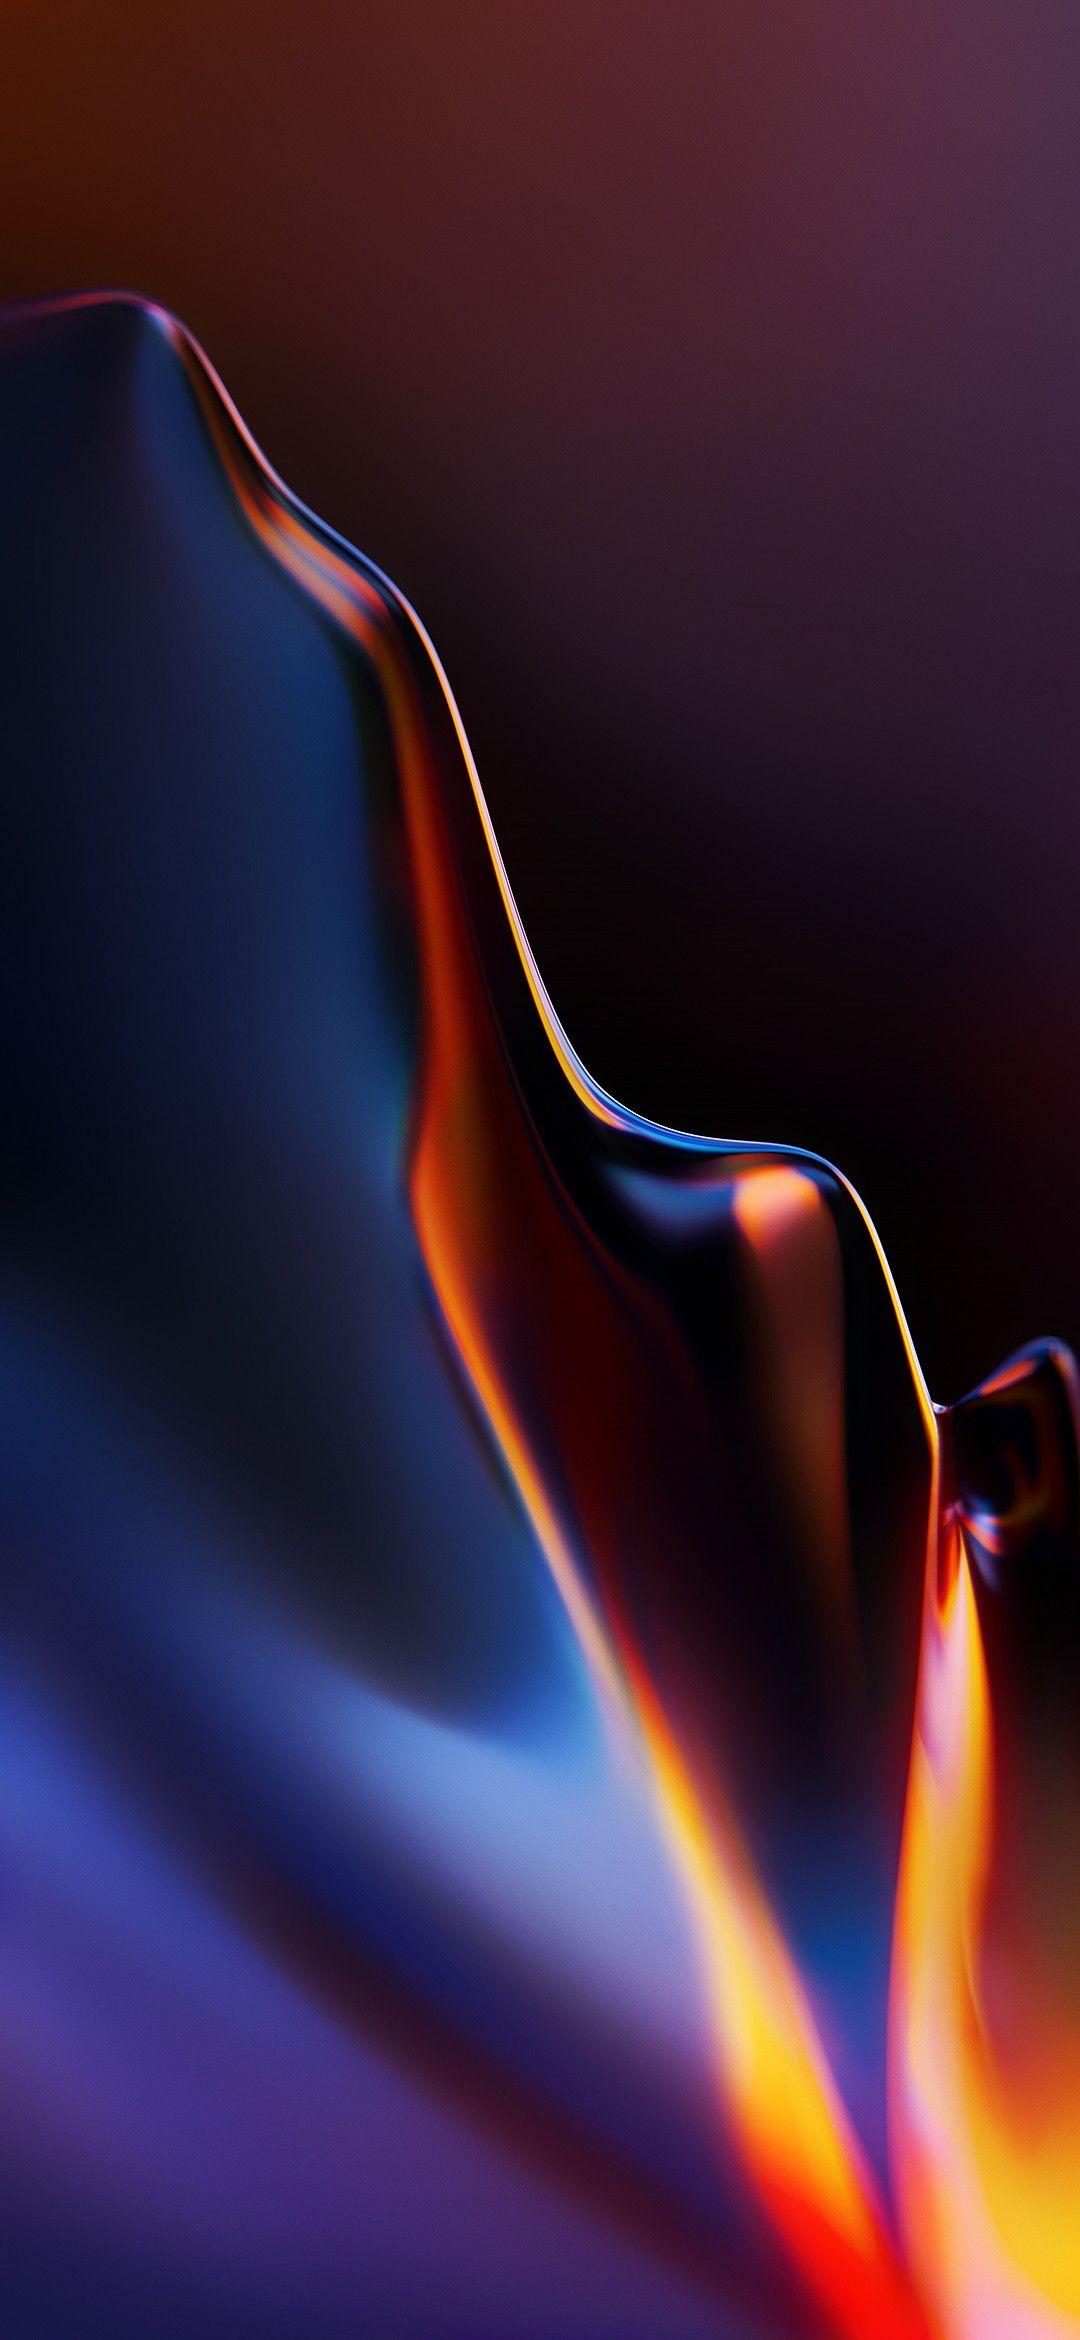 OnePlus 6t. Oneplus wallpaper, Android wallpaper